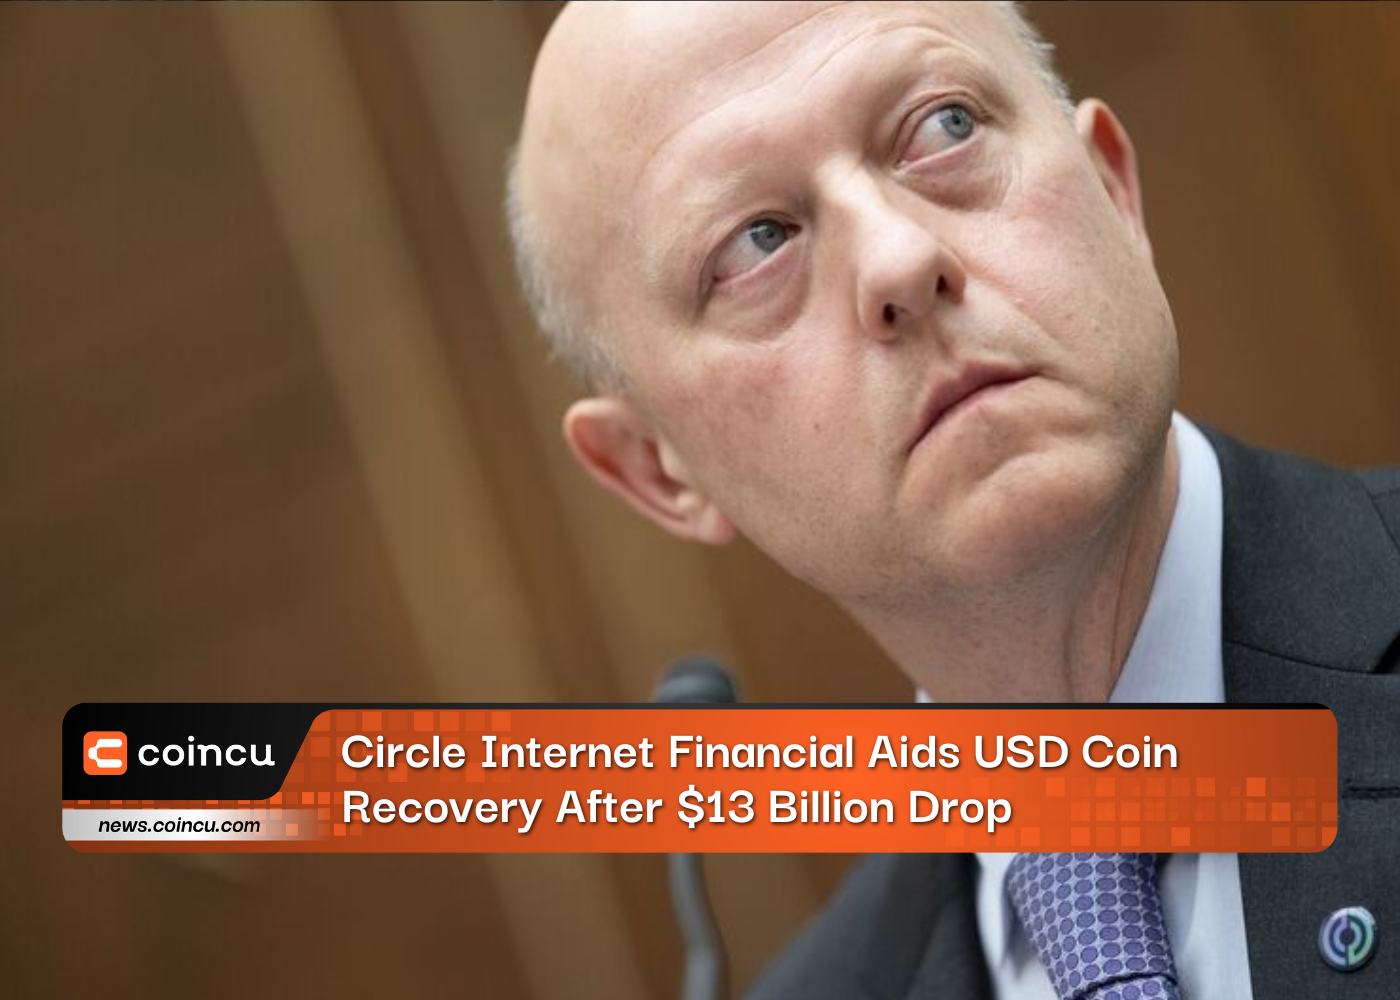 Circle Internet Financial Aids USD Coin Recovery After $13 Billion Drop